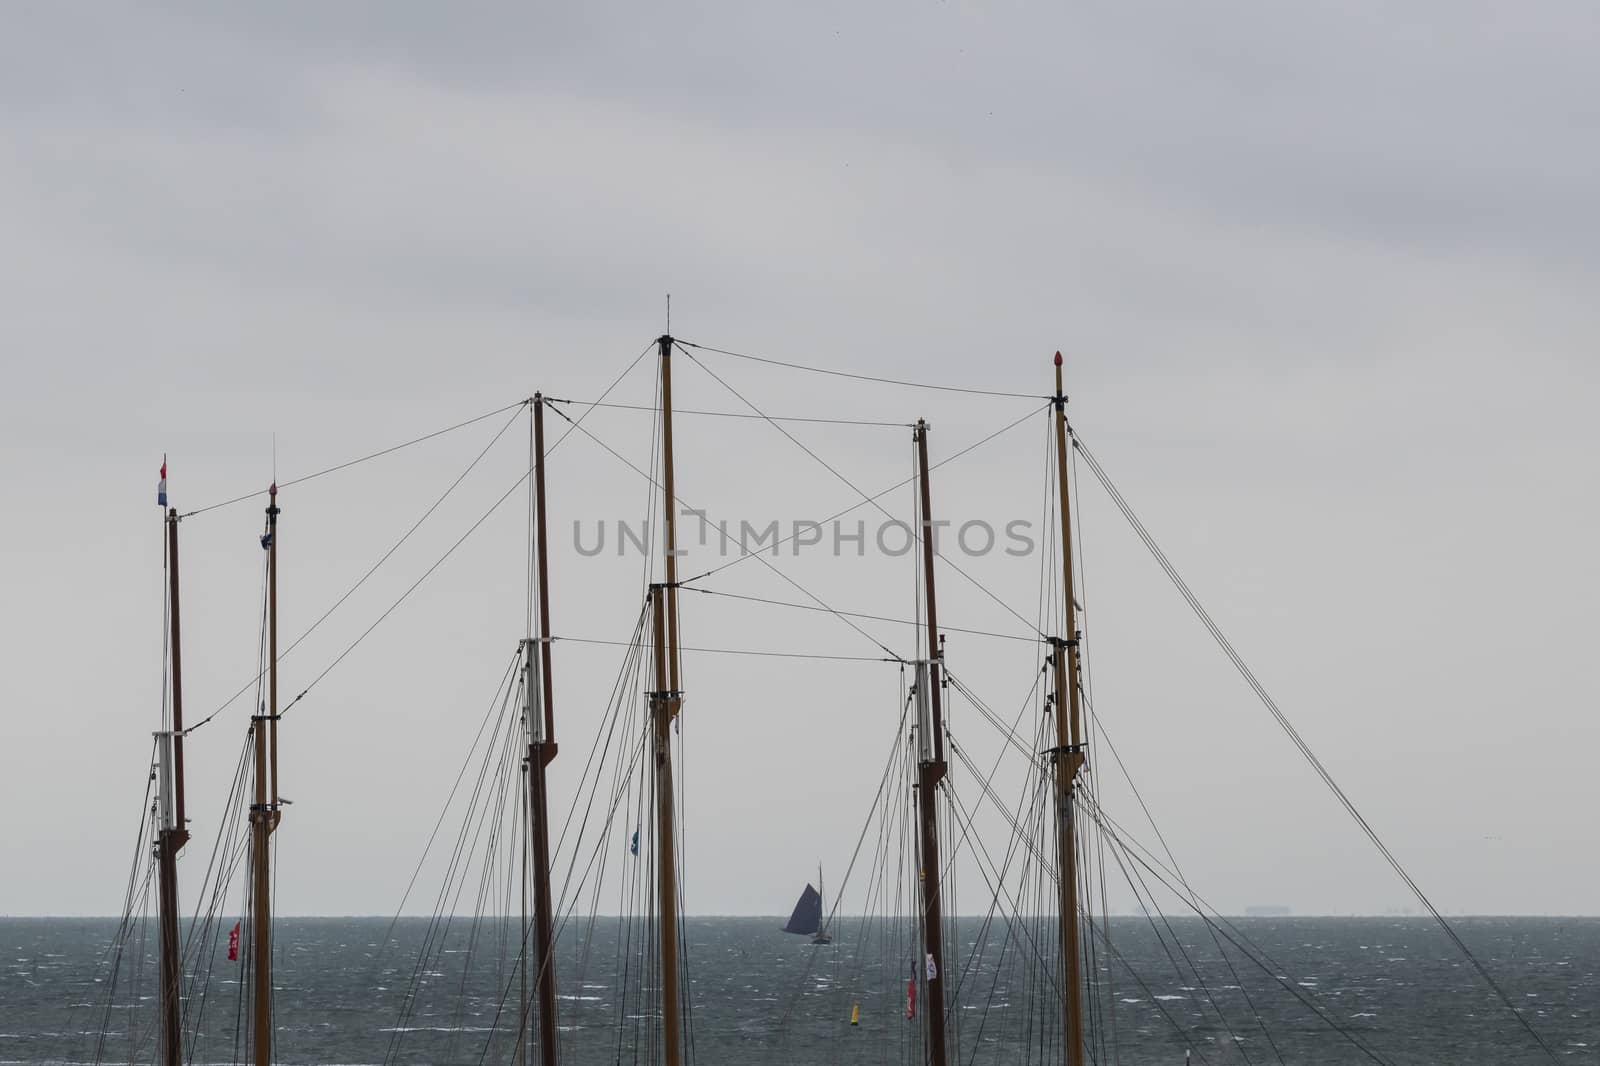 Sailboat in the Wadden Sea as seen through the masts of two three-masted sailboats
